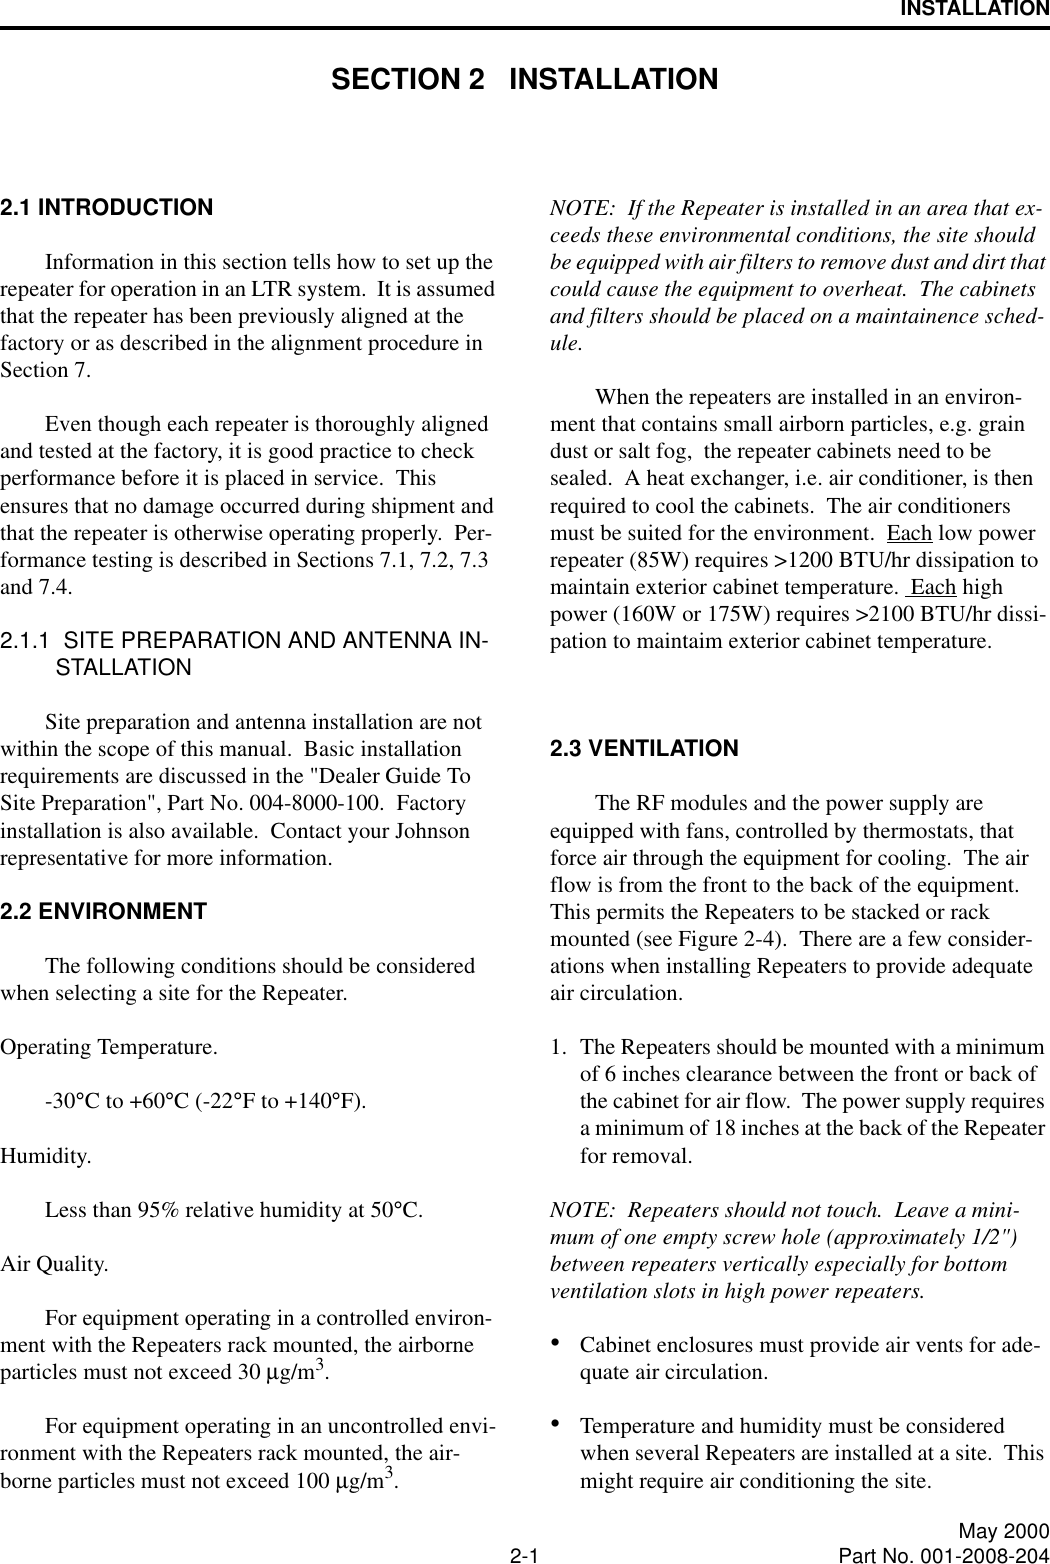 2-1 May 2000Part No. 001-2008-204INSTALLATIONSECTION 2   INSTALLATION2.1 INTRODUCTIONInformation in this section tells how to set up the repeater for operation in an LTR system.  It is assumed that the repeater has been previously aligned at the factory or as described in the alignment procedure in Section 7.Even though each repeater is thoroughly aligned and tested at the factory, it is good practice to check performance before it is placed in service.  This ensures that no damage occurred during shipment and that the repeater is otherwise operating properly.  Per-formance testing is described in Sections 7.1, 7.2, 7.3 and 7.4.2.1.1  SITE PREPARATION AND ANTENNA IN-STALLATIONSite preparation and antenna installation are not within the scope of this manual.  Basic installation requirements are discussed in the &quot;Dealer Guide To Site Preparation&quot;, Part No. 004-8000-100.  Factory installation is also available.  Contact your Johnson representative for more information.2.2 ENVIRONMENTThe following conditions should be considered when selecting a site for the Repeater.Operating Temperature.-30°C to +60°C (-22°F to +140°F).      Humidity.Less than 95% relative humidity at 50°C.Air Quality.For equipment operating in a controlled environ-ment with the Repeaters rack mounted, the airborne particles must not exceed 30 µg/m3.For equipment operating in an uncontrolled envi-ronment with the Repeaters rack mounted, the air-borne particles must not exceed 100 µg/m3.NOTE:  If the Repeater is installed in an area that ex-ceeds these environmental conditions, the site should be equipped with air filters to remove dust and dirt that could cause the equipment to overheat.  The cabinets and filters should be placed on a maintainence sched-ule.When the repeaters are installed in an environ-ment that contains small airborn particles, e.g. grain dust or salt fog,  the repeater cabinets need to be sealed.  A heat exchanger, i.e. air conditioner, is then required to cool the cabinets.  The air conditioners must be suited for the environment.  Each low power repeater (85W) requires &gt;1200 BTU/hr dissipation to maintain exterior cabinet temperature.  Each high power (160W or 175W) requires &gt;2100 BTU/hr dissi-pation to maintaim exterior cabinet temperature.2.3 VENTILATIONThe RF modules and the power supply are equipped with fans, controlled by thermostats, that force air through the equipment for cooling.  The air flow is from the front to the back of the equipment.  This permits the Repeaters to be stacked or rack mounted (see Figure 2-4).  There are a few consider-ations when installing Repeaters to provide adequate air circulation.1. The Repeaters should be mounted with a minimum of 6 inches clearance between the front or back of the cabinet for air flow.  The power supply requires a minimum of 18 inches at the back of the Repeater for removal.NOTE:  Repeaters should not touch.  Leave a mini-mum of one empty screw hole (approximately 1/2&quot;) between repeaters vertically especially for bottom ventilation slots in high power repeaters.•Cabinet enclosures must provide air vents for ade-quate air circulation.•Temperature and humidity must be considered when several Repeaters are installed at a site.  This might require air conditioning the site.